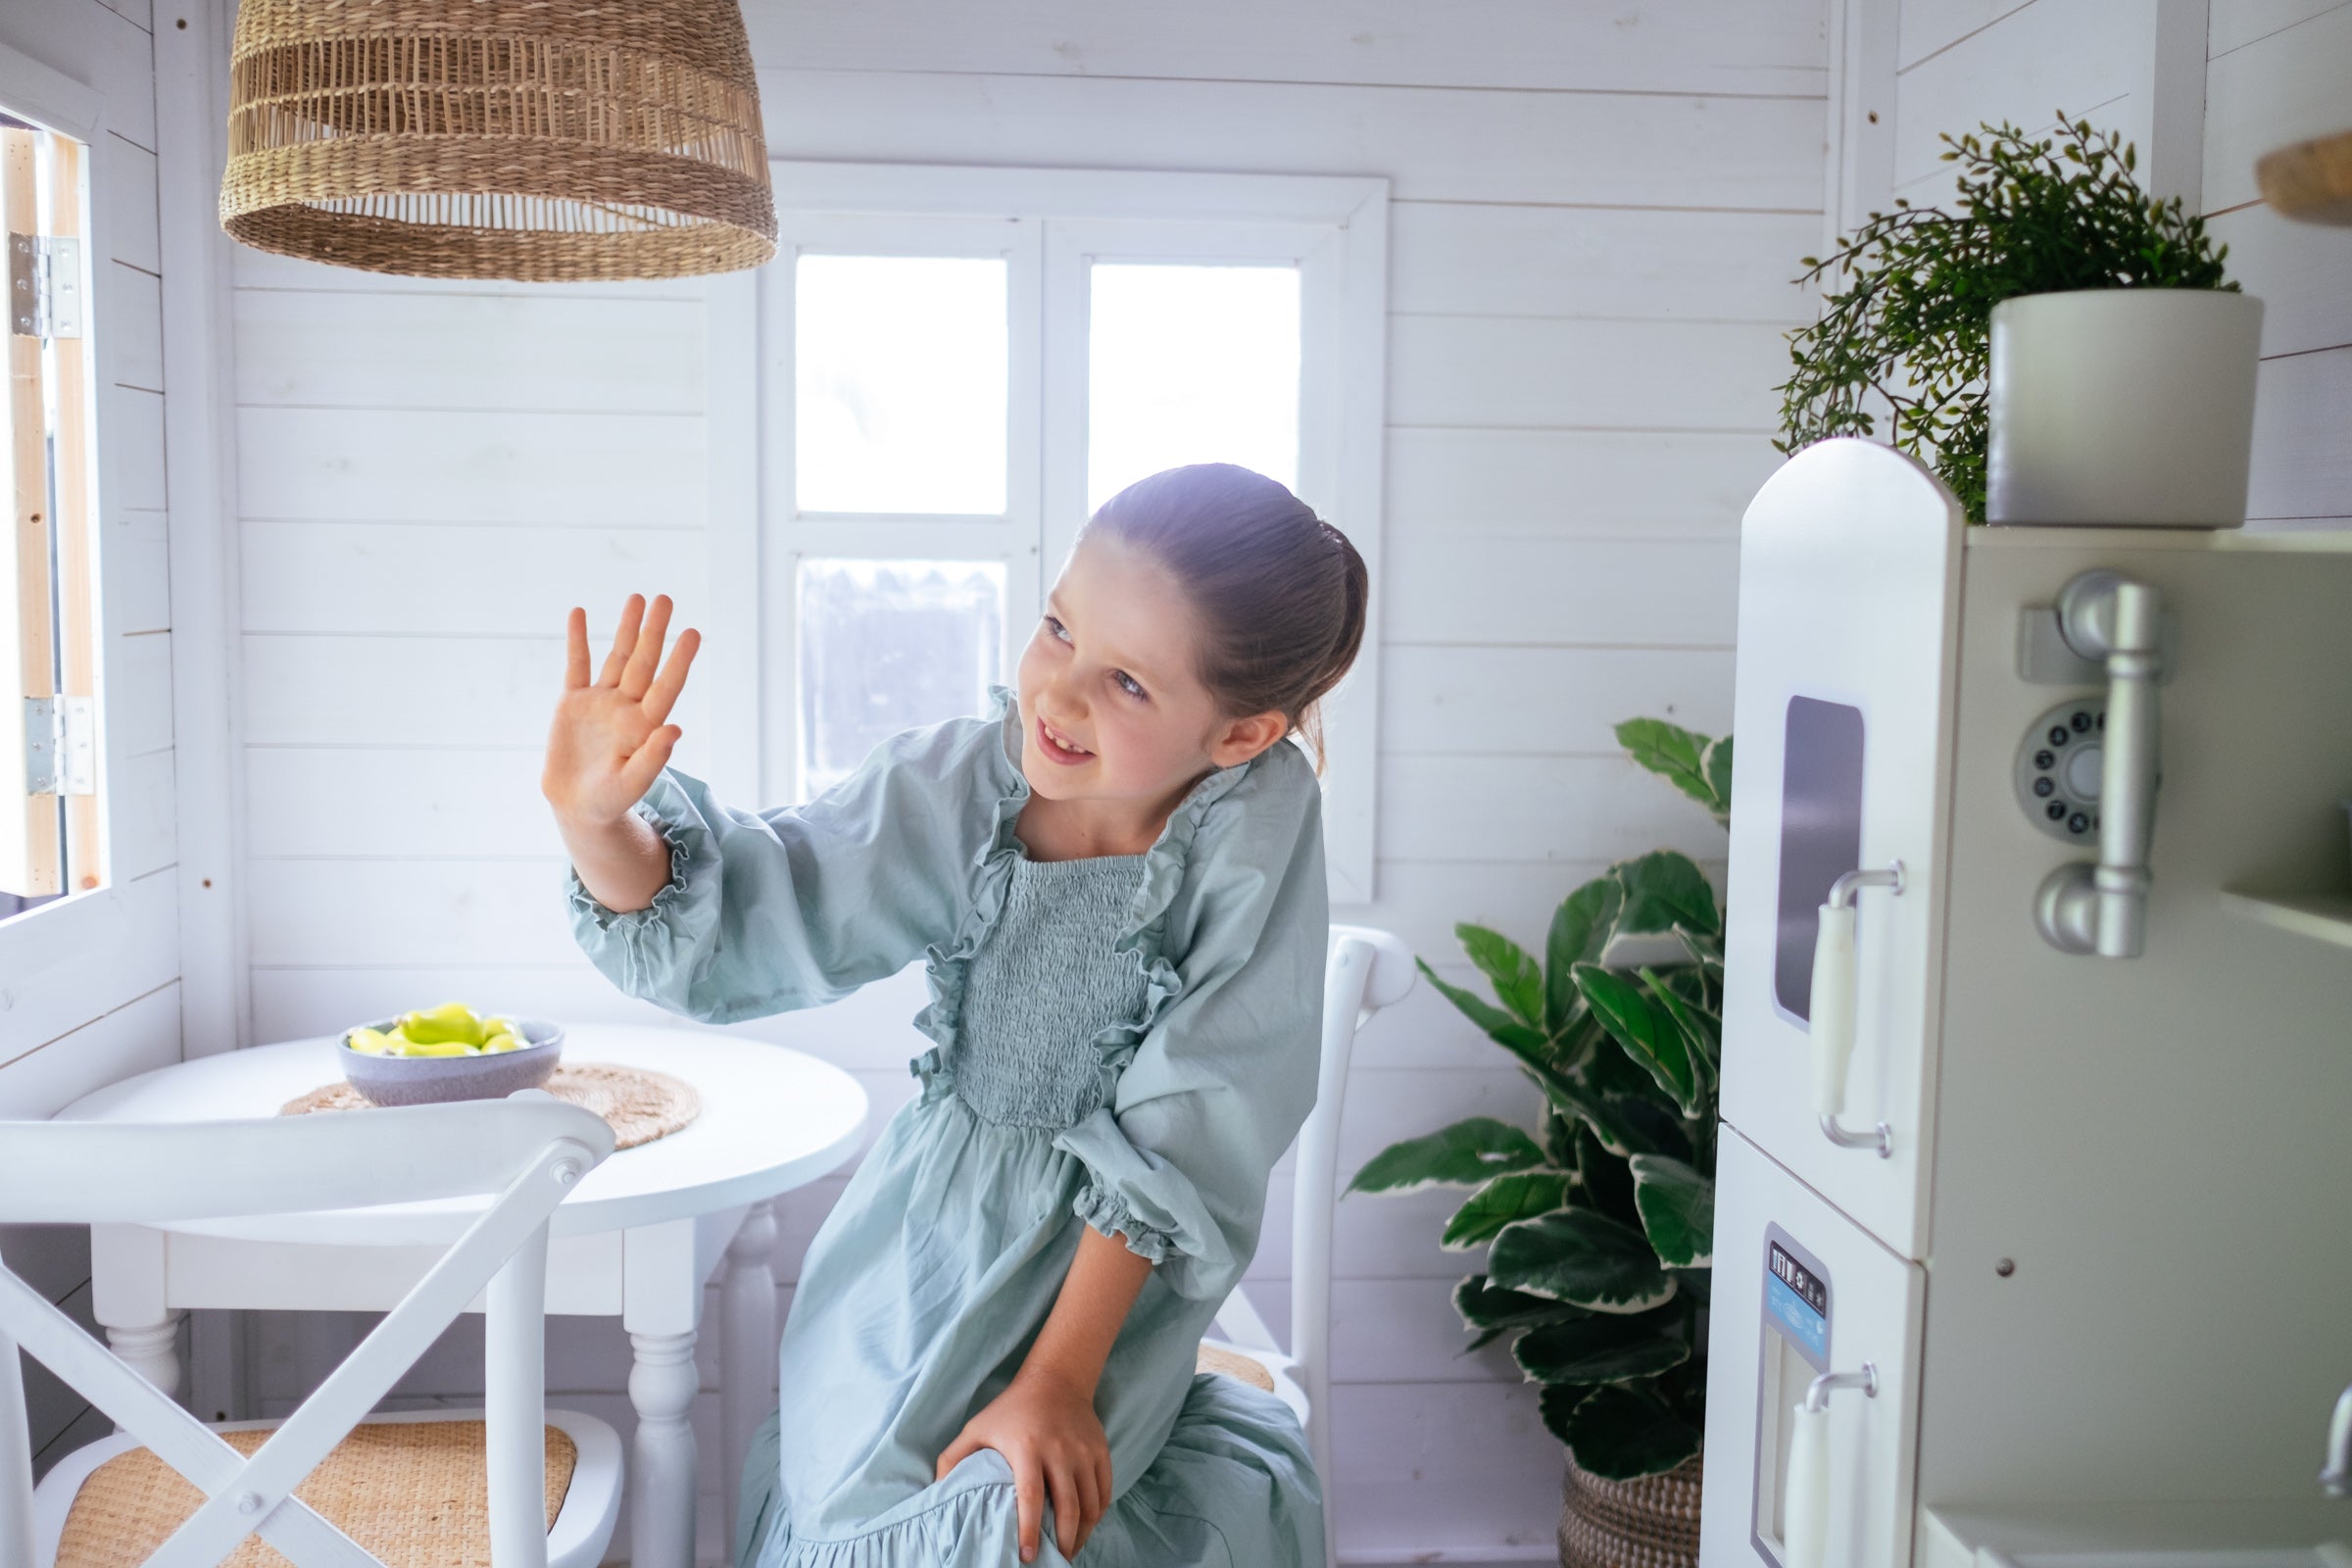 Young girl waves and smiles inside white timber cubby house. Kids white timber cross back chairs and white timber round table in corner.